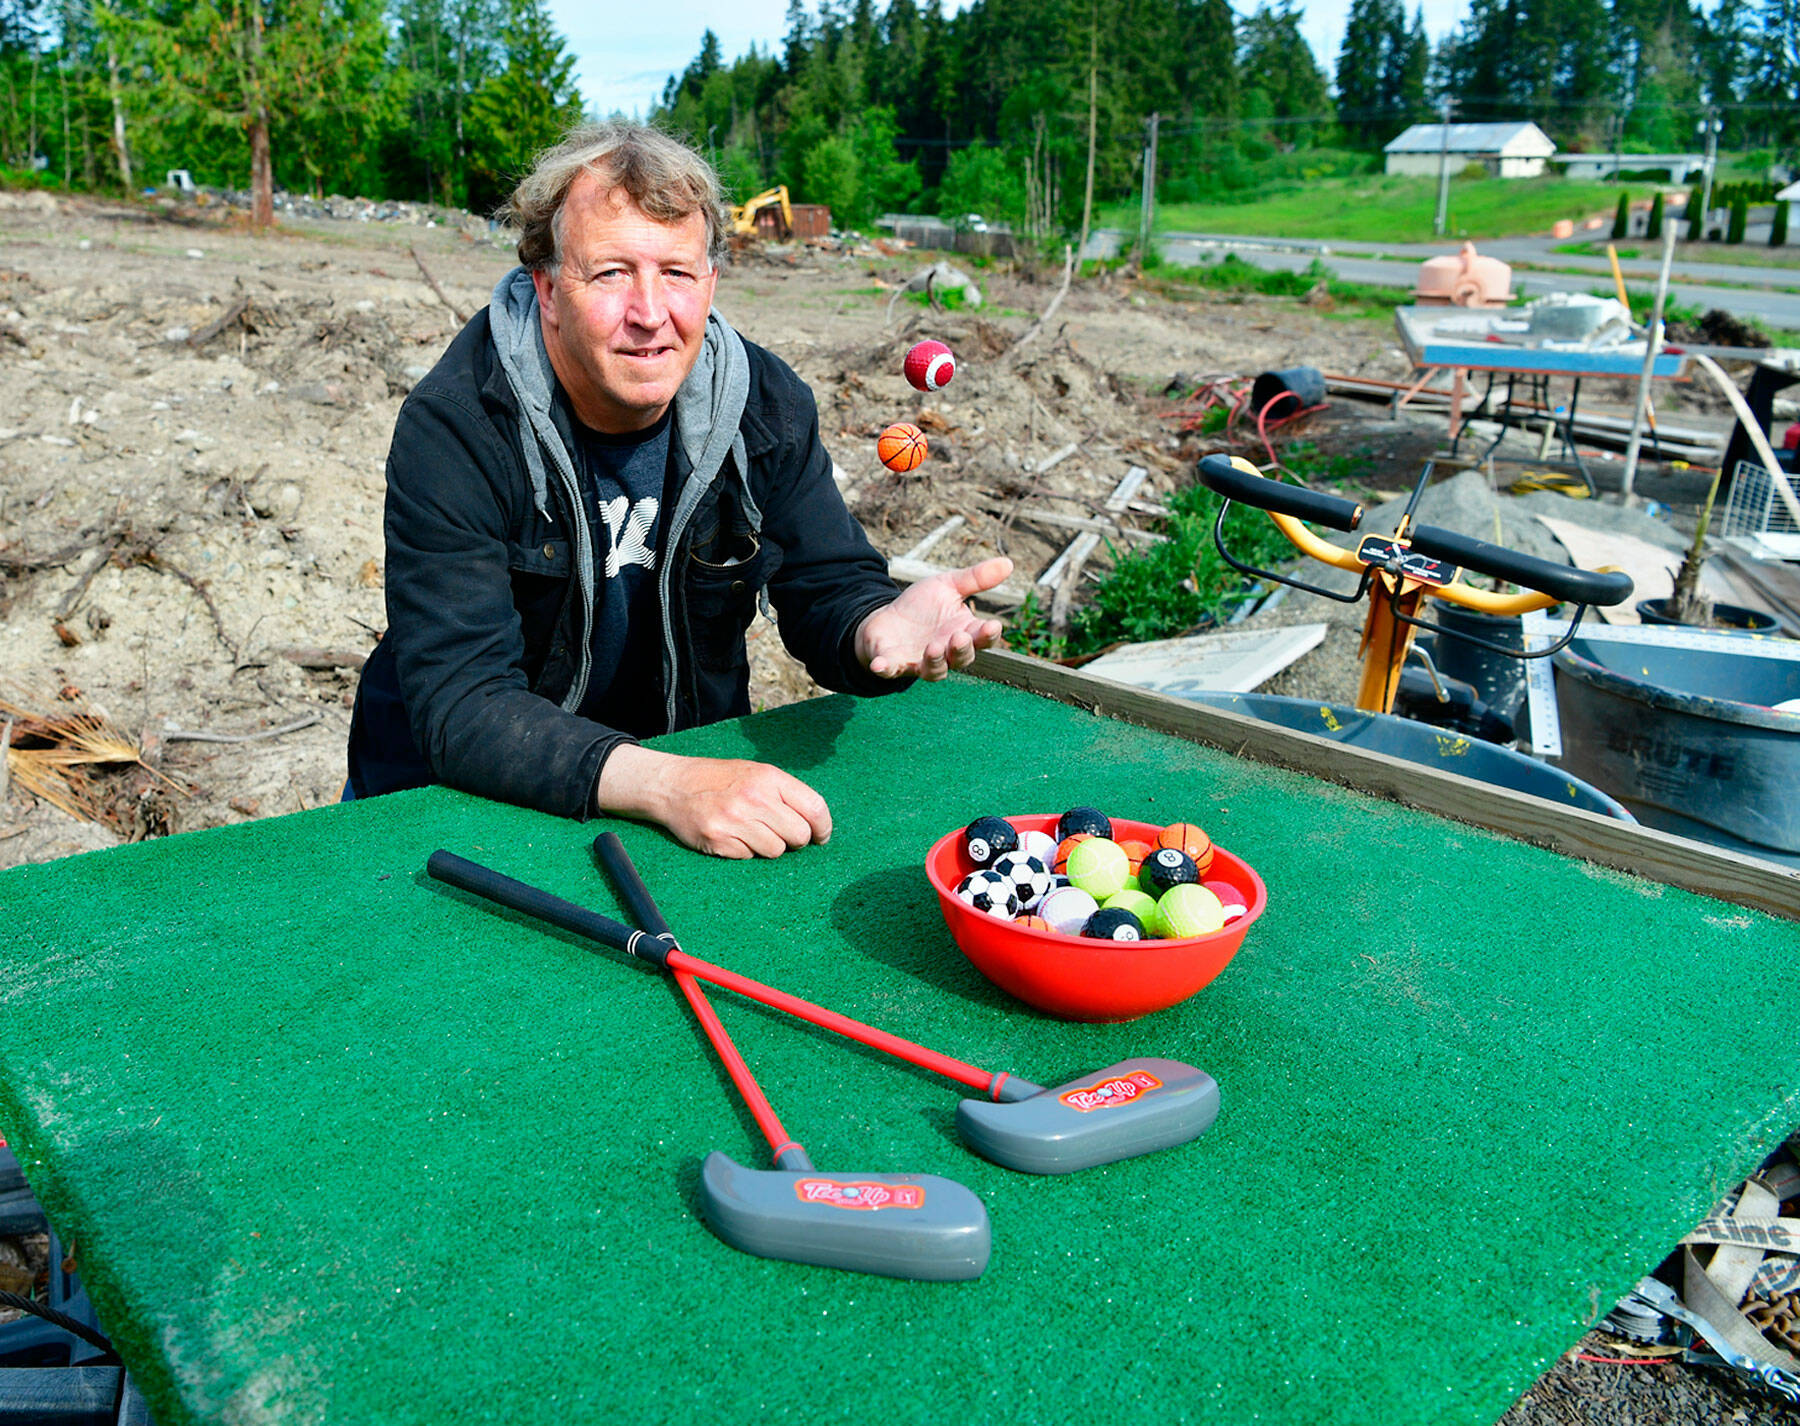 Richard Moon and his wife Janice plan to construct two 18-hole mini-golf courses — one for families, one for adults — on acreage off South Barr Road and U.S. Highway 101 eight miles east of Port Angeles. Moon expects the courses to open in summer 2023 or 2024. (Paul Dunn/Peninsula Daily News)